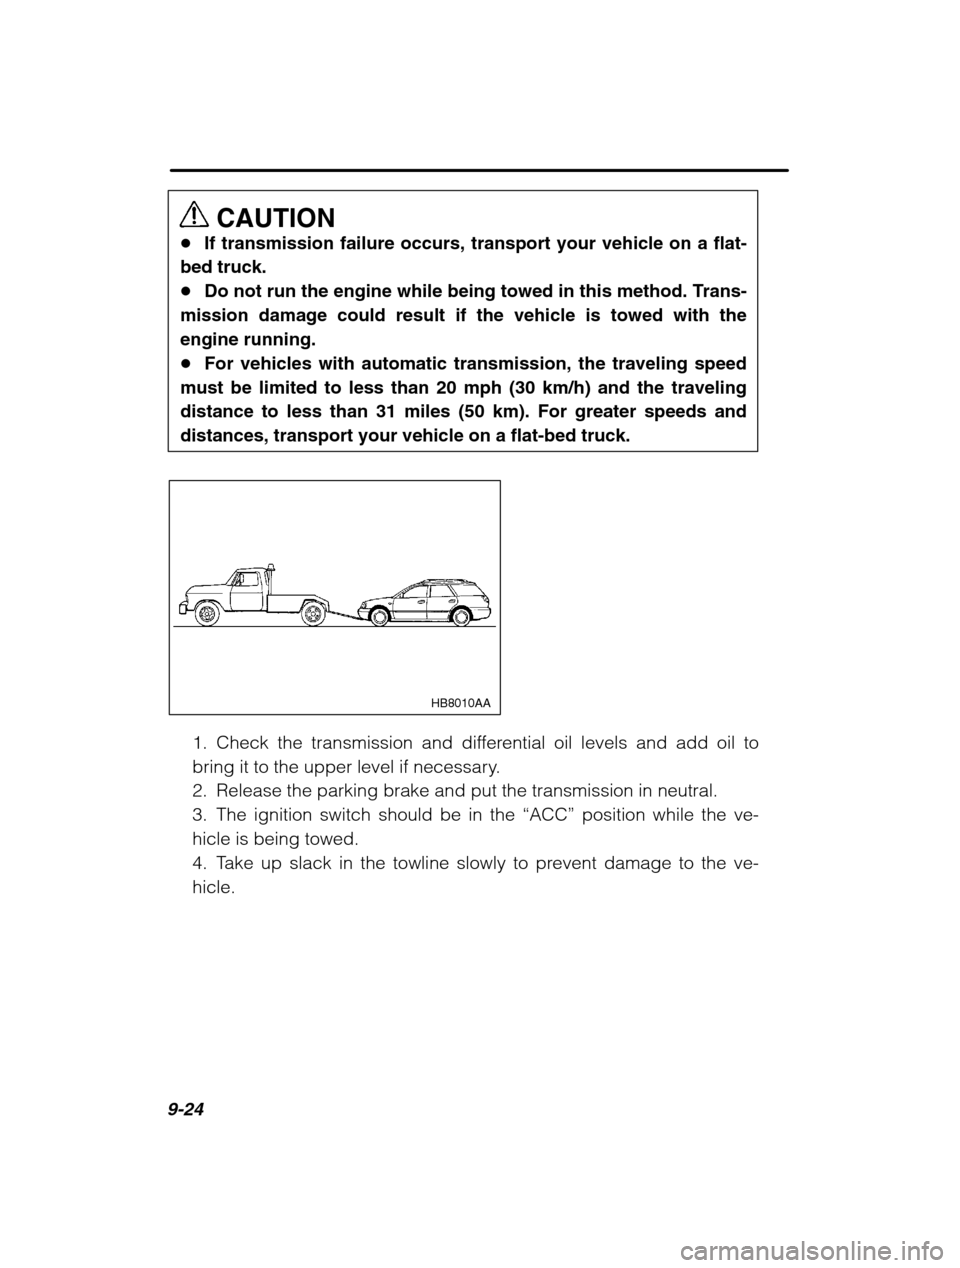 SUBARU LEGACY 2002 3.G Owners Manual 9-24
CAUTION
� If transmission failure occurs, transport your vehicle on a flat-
bed truck. � Do not run the engine while being towed in this method. Trans-
mission damage could result if the vehicle 